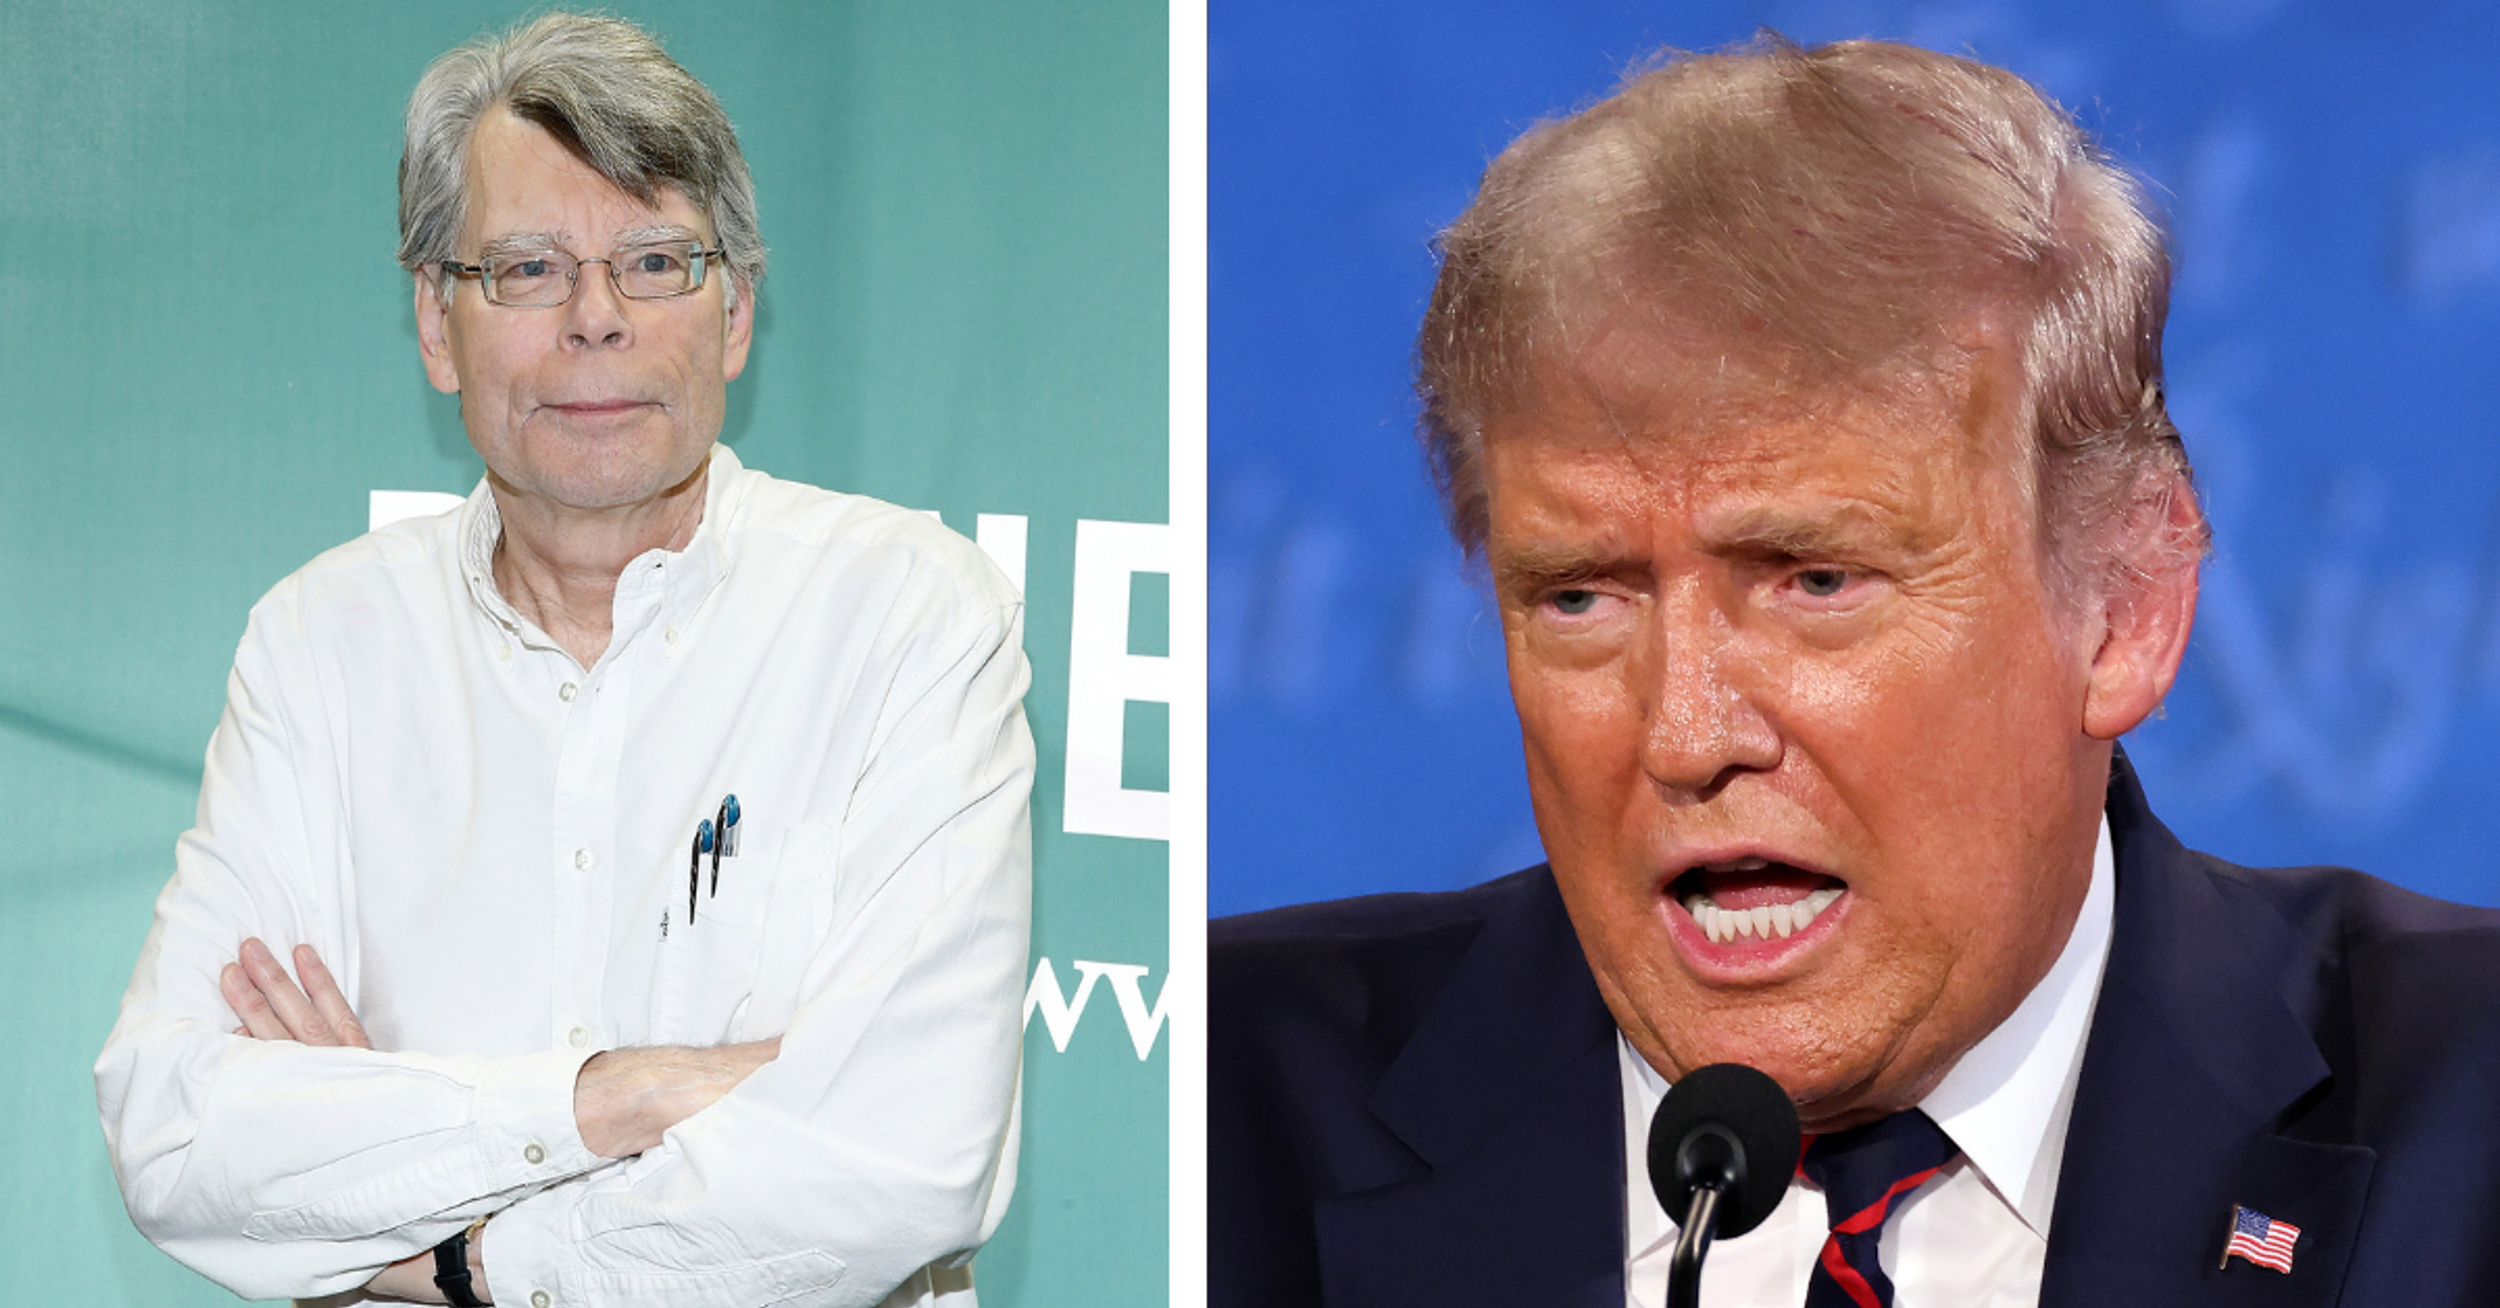 Stephen King Perfectly Summed Up The First Debate In A Brutal Tweet—And Twitter Couldn't Agree More